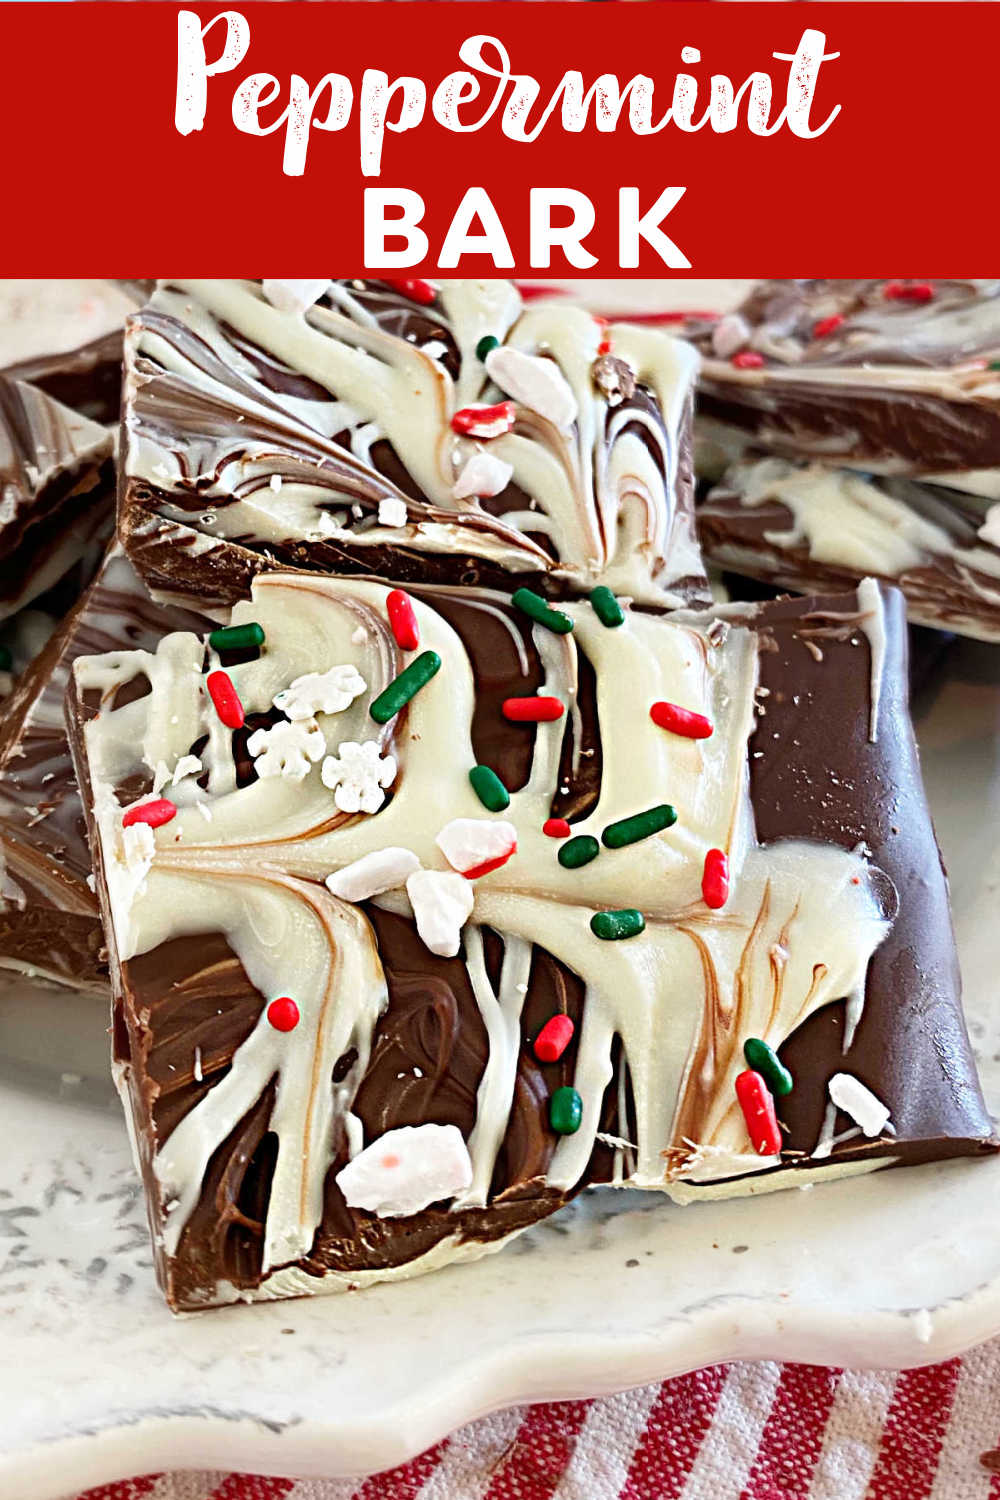 This Easy Peppermint Bark recipe made with white chocolate, semisweet chocolate and crushed peppermint candies is a festive holiday treat! Homemade peppermint bark makes a delicious Christmas gift for everyone on your list! via @meamel